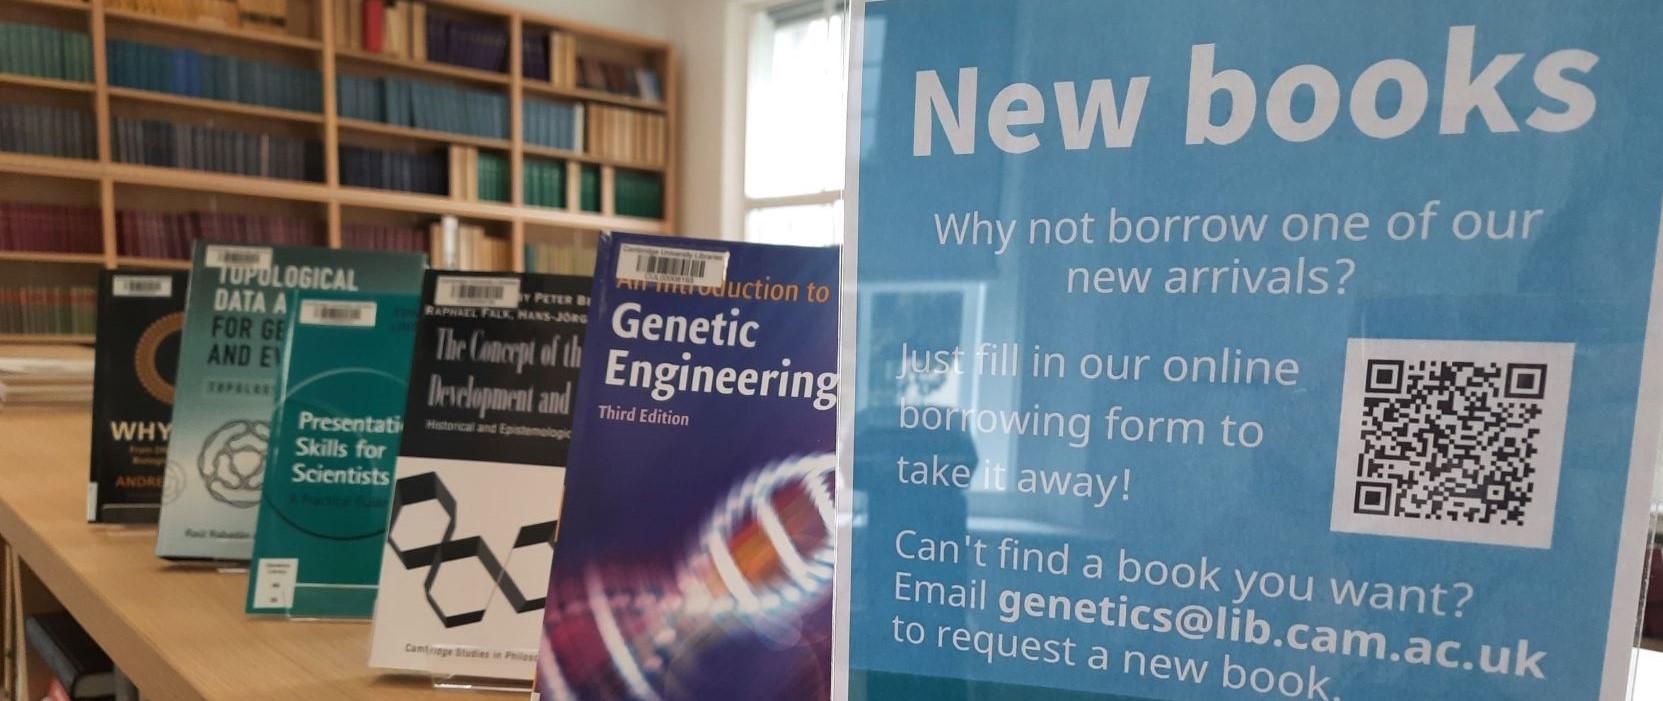 A new books display containing books recently purchased for the Genetics Library.